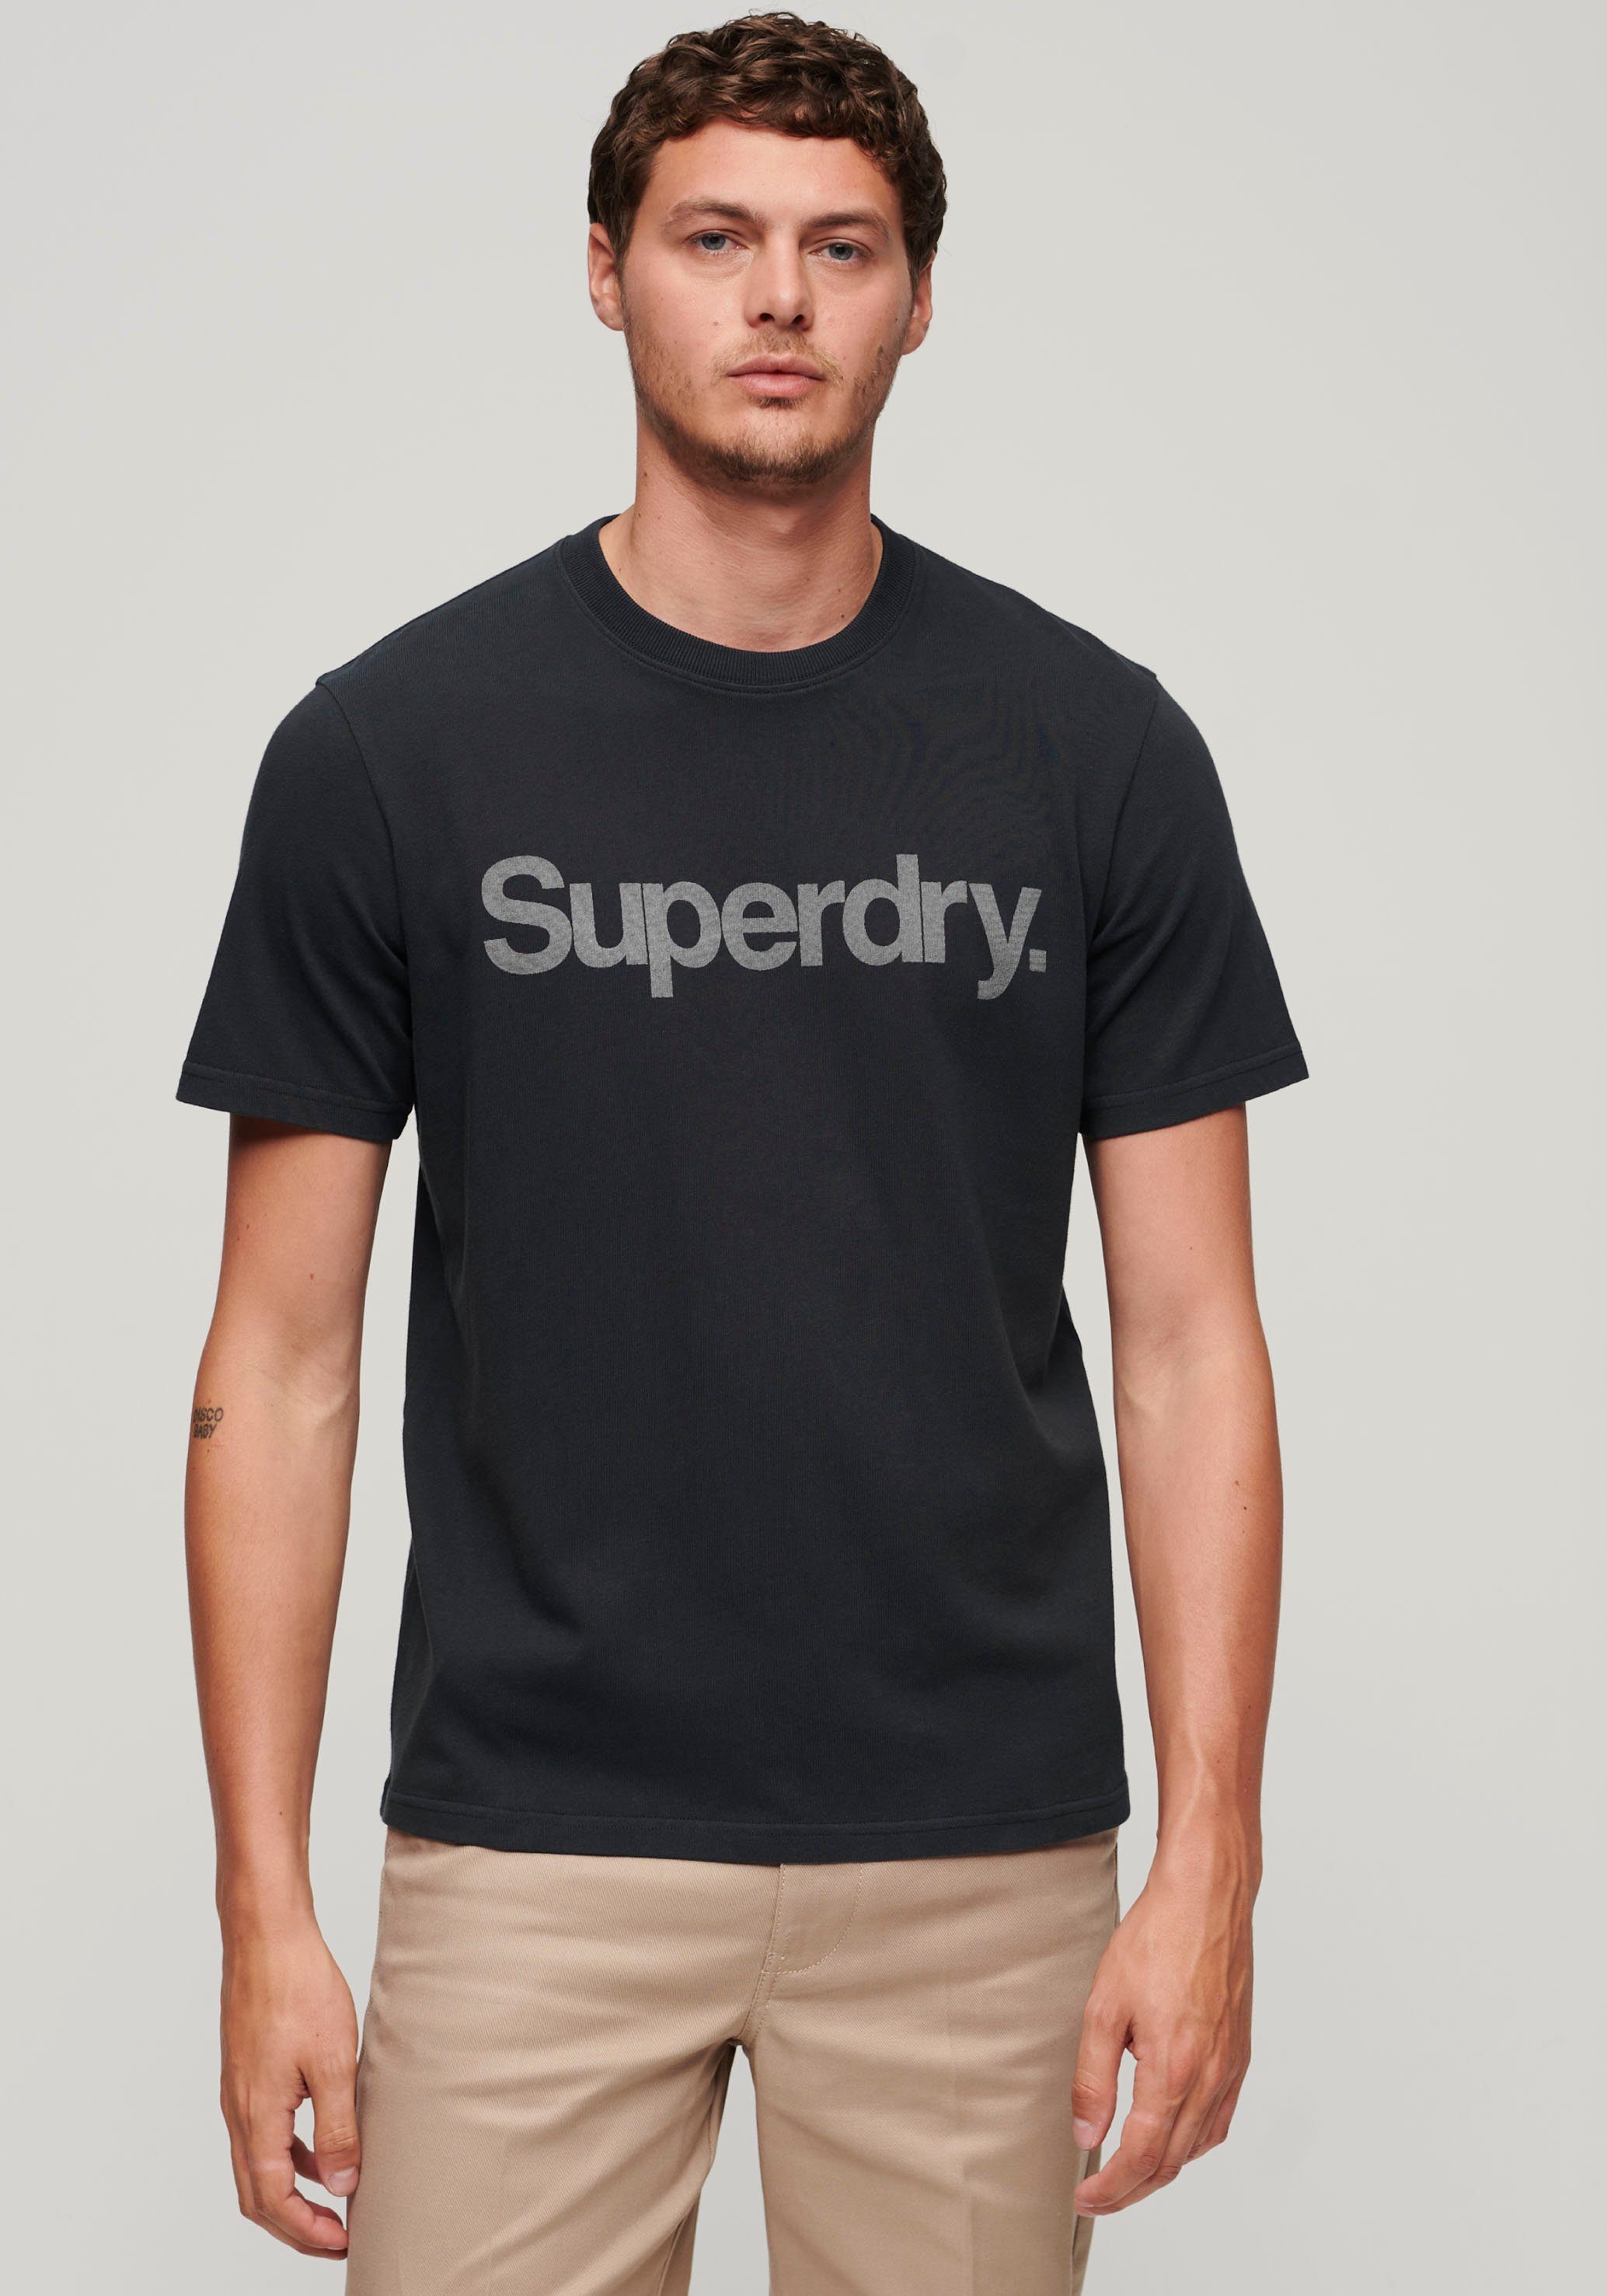 TEE eclipse navy CORE T-Shirt LOGO Superdry CITY LOOSE